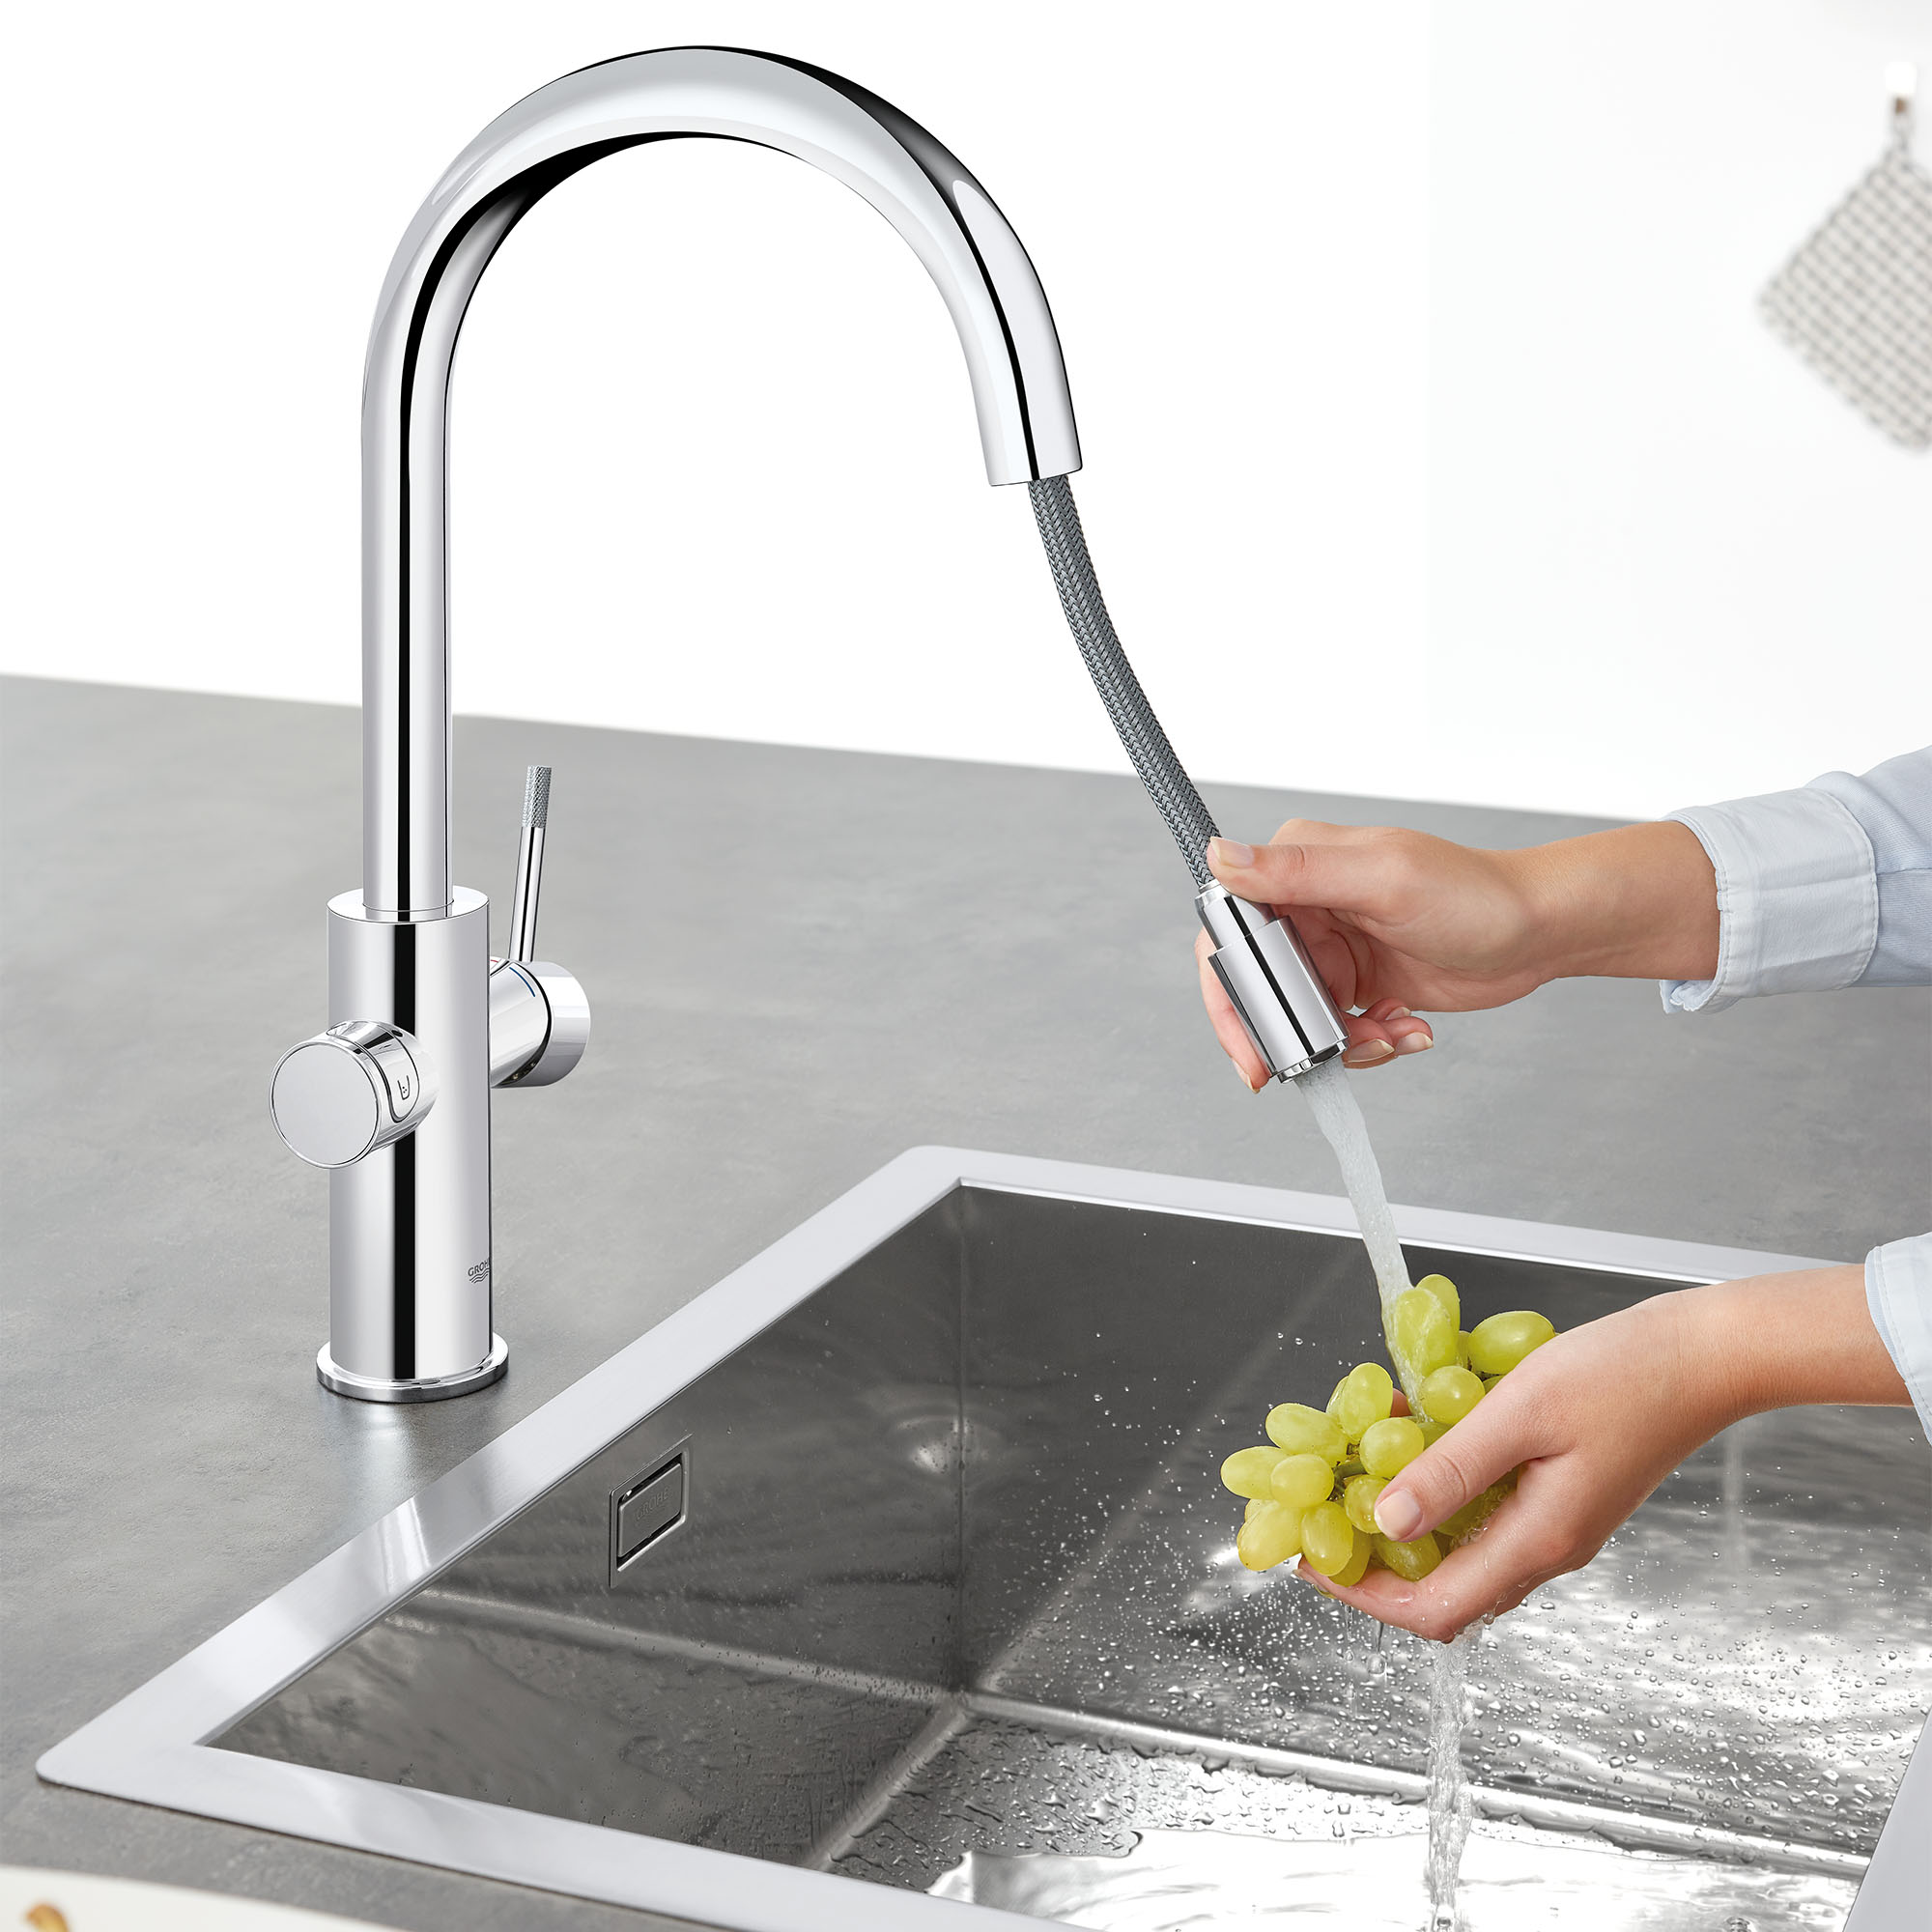 Water carbonator GROHE Blue Fizz brings sparkling water enjoyment